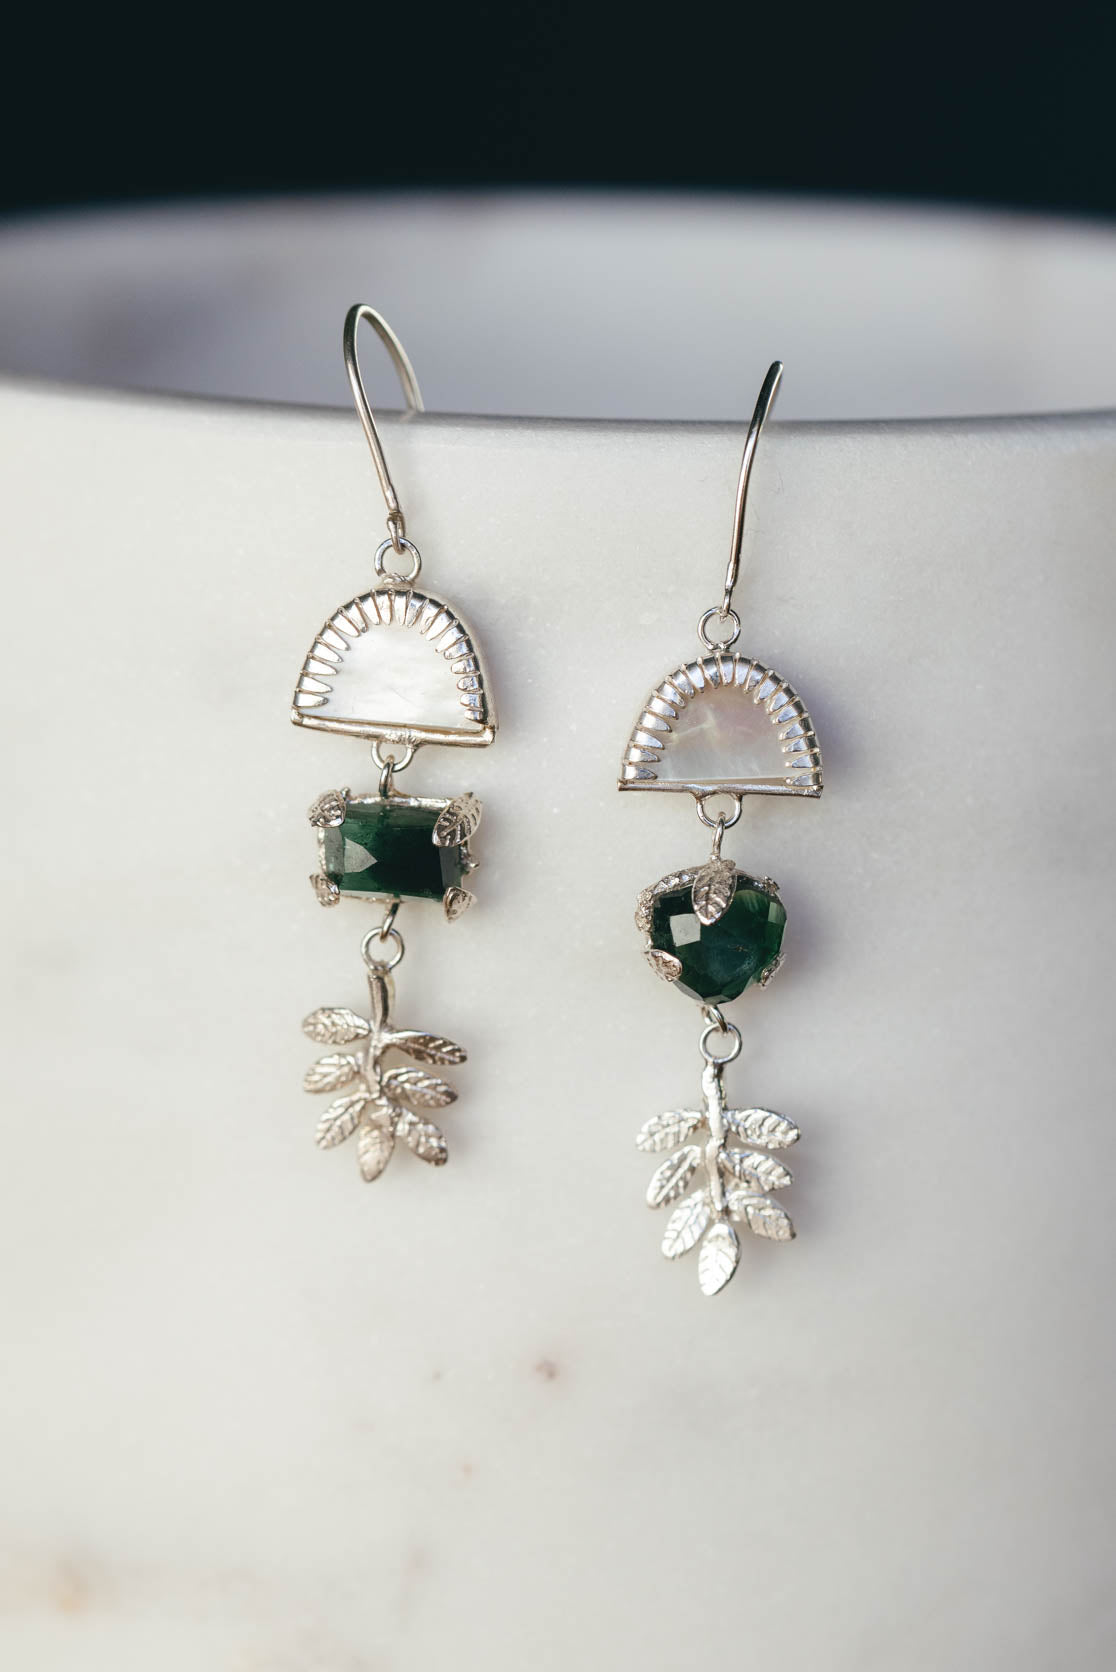 Botanical Drop Earrings - dark green tourmaline and mother of pearl